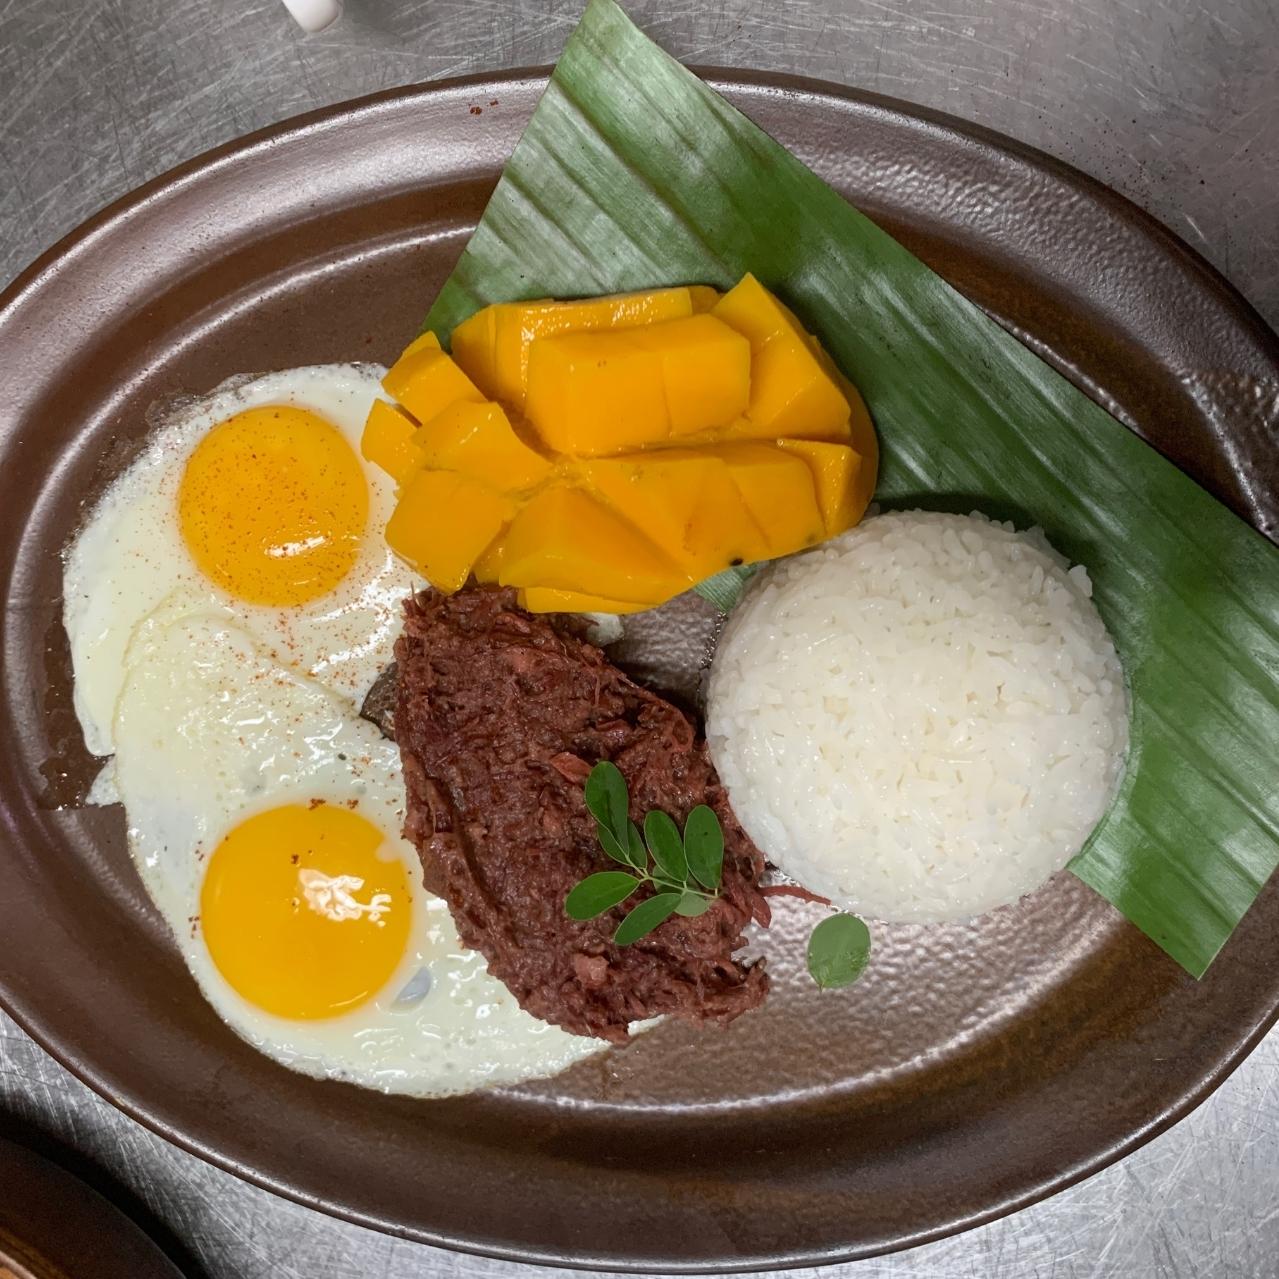 Discover The Traditional Filipino Breakfast Silog At Bliss Restaurant